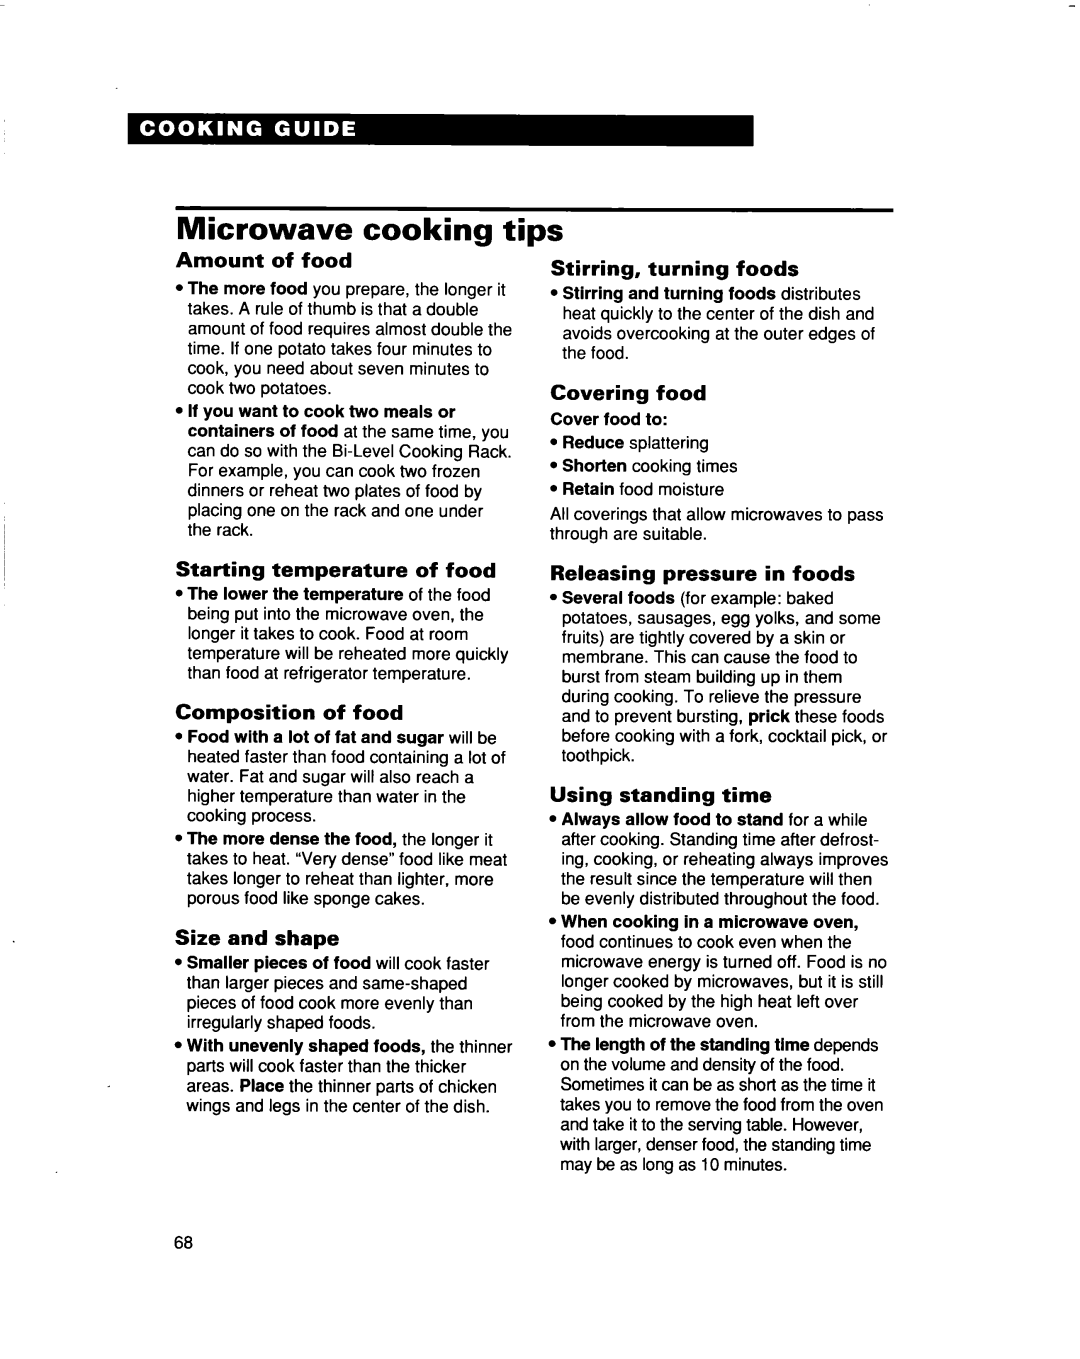 Whirlpool MH9115XB Microwave cooking tips, Amount of food, Stirring, turning foods, Covering food, Composition of food 